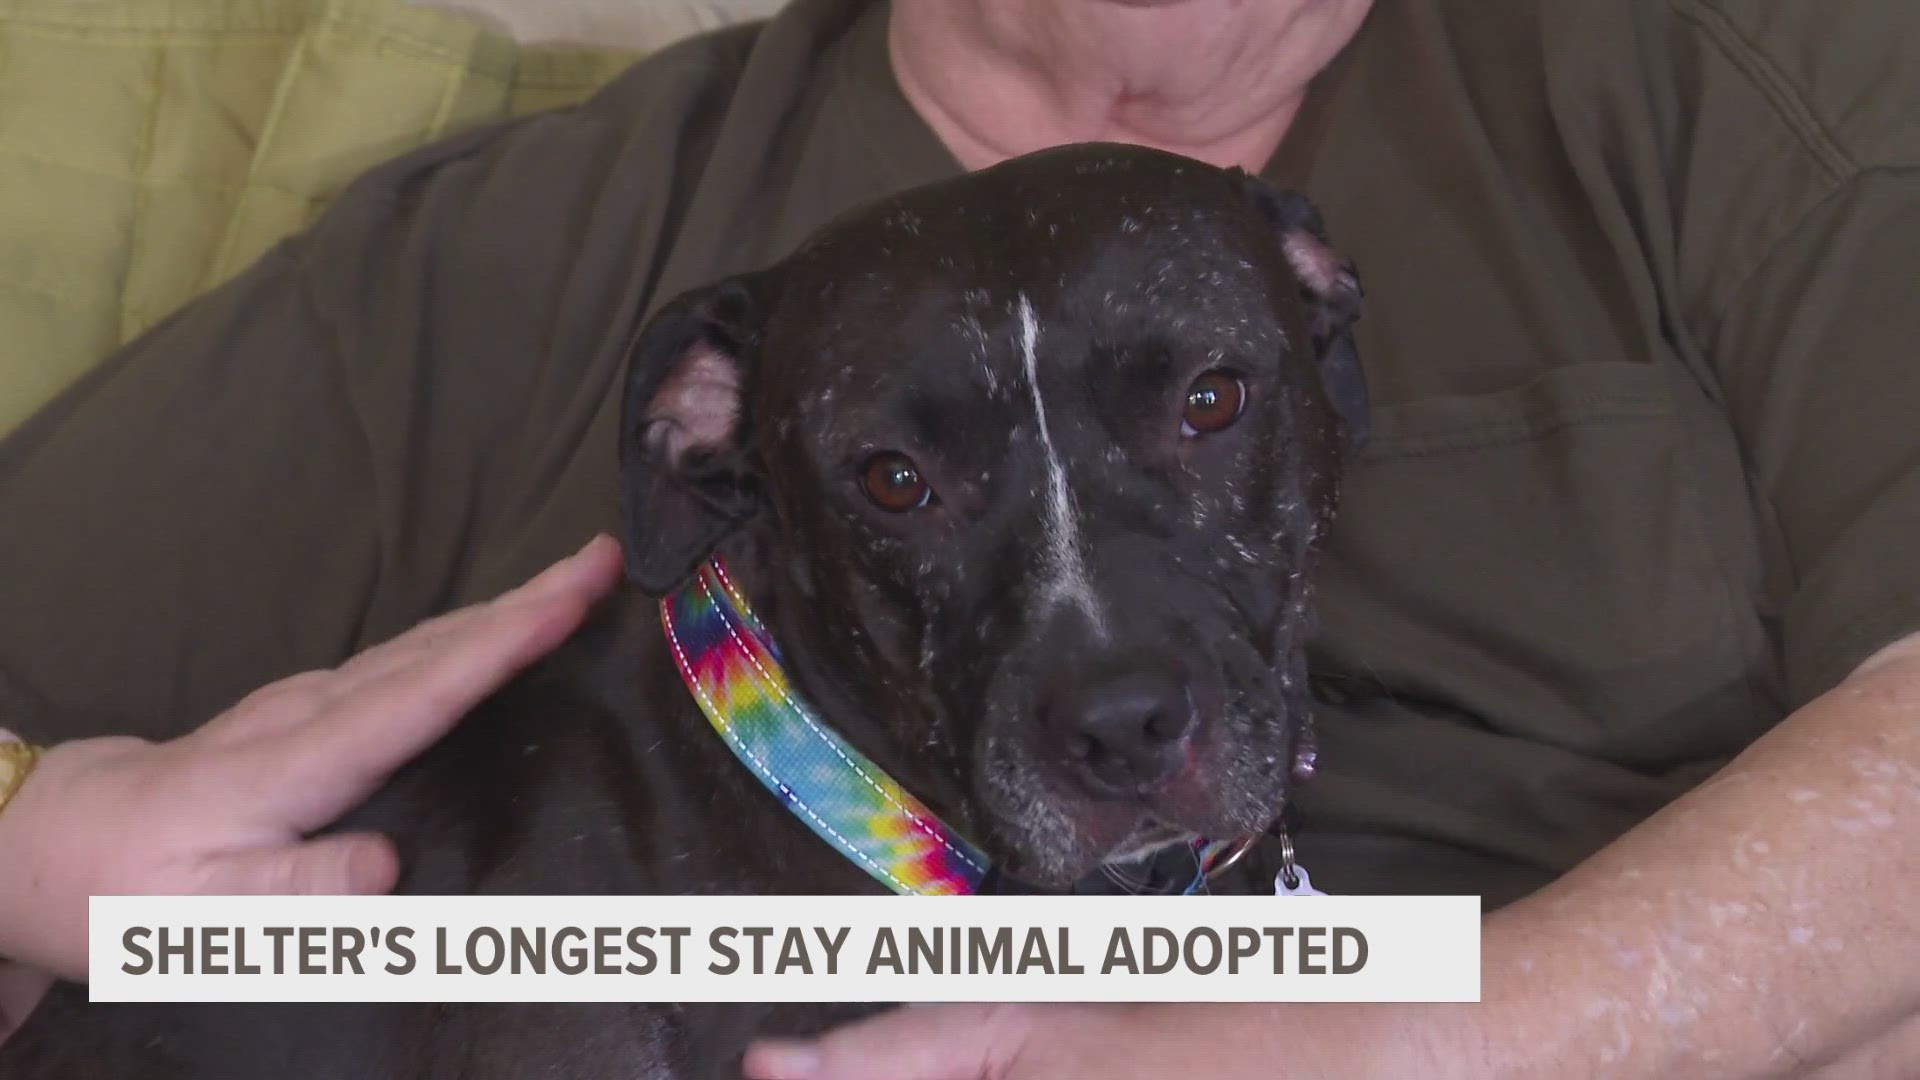 Shelter staff say the scars on her face may have scared off potential adopters, but her new parents say they only make Kimmy more special.